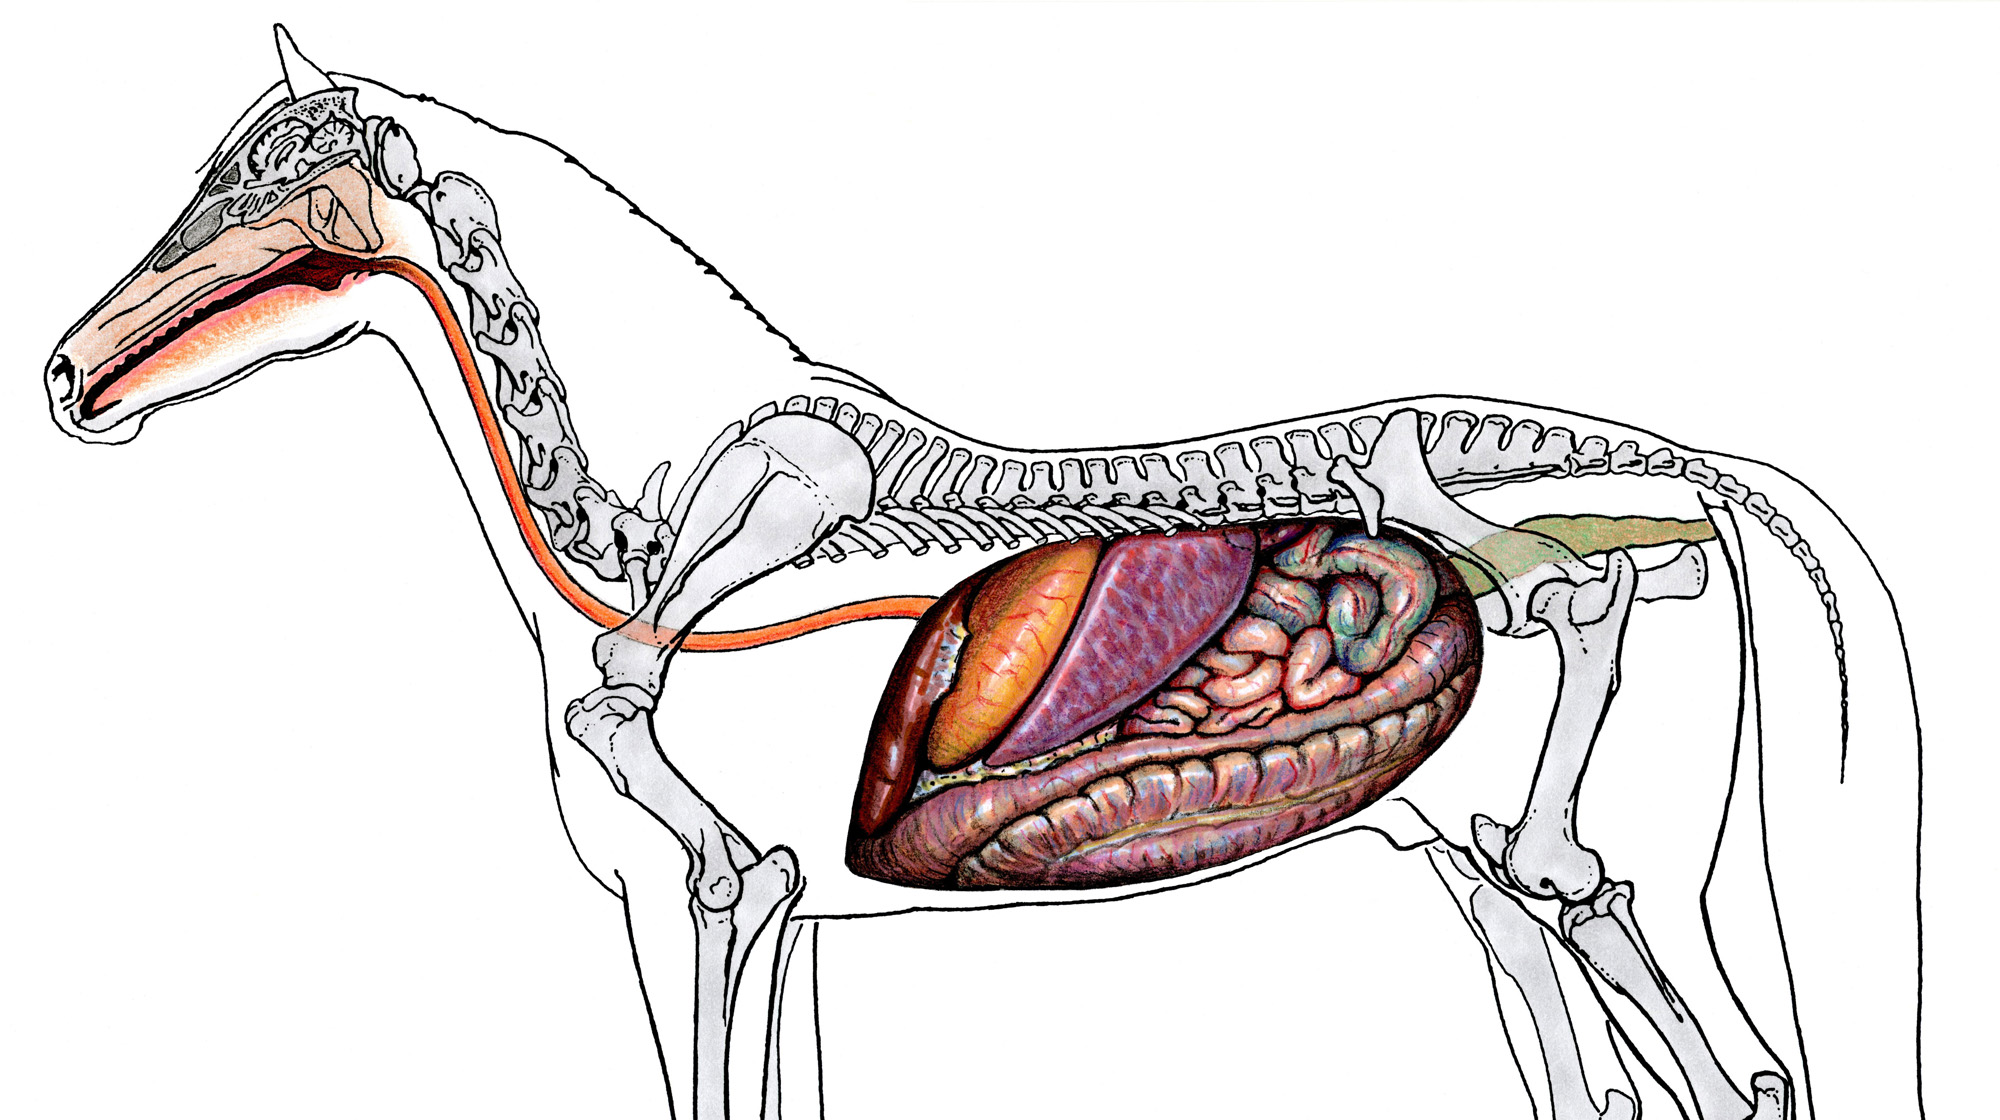 FEI Campus: Equine Anatomy & Physiology